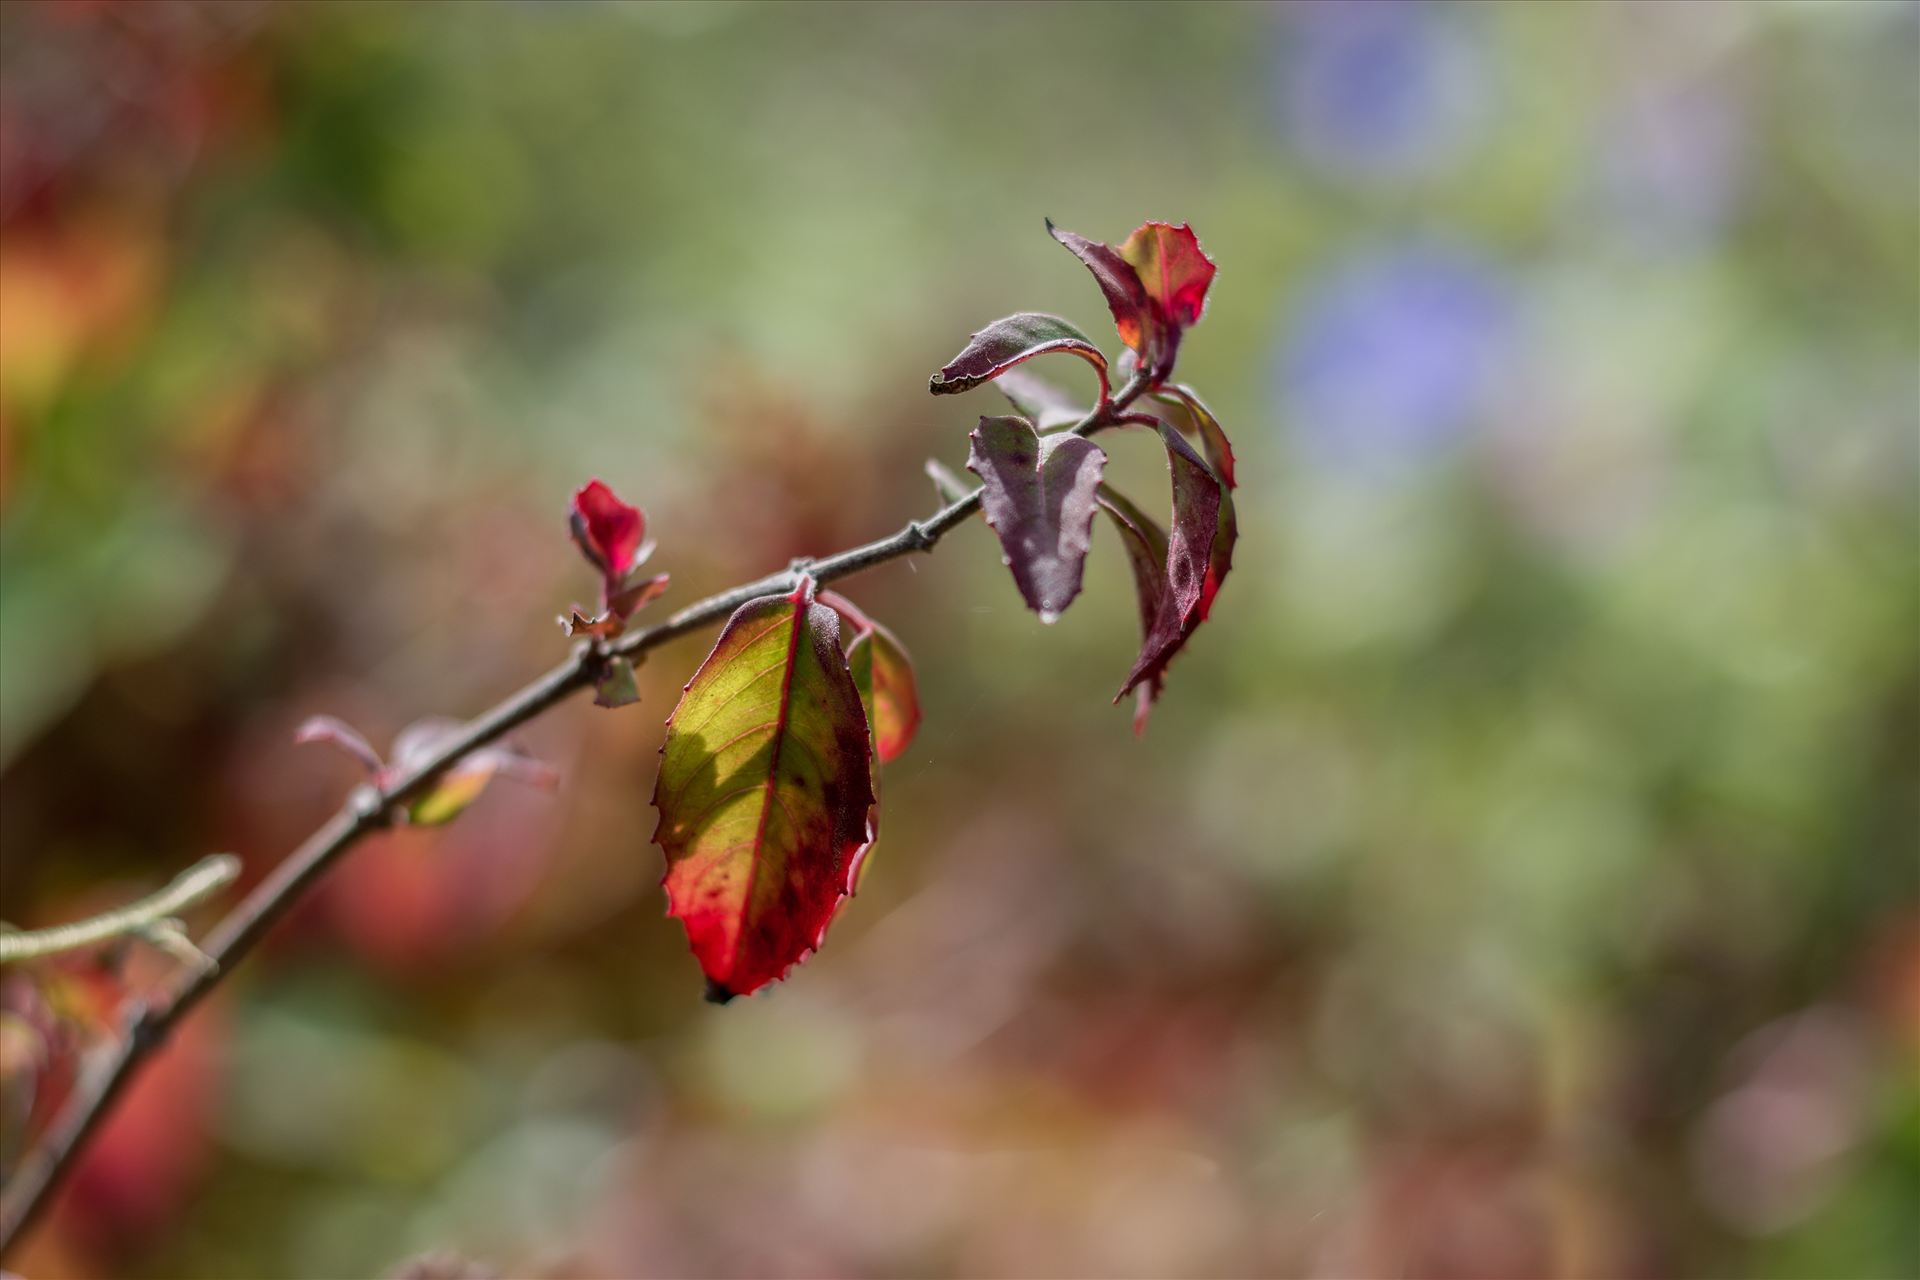 Leaves in the Sun 10272015.jpg - Sunlight falling on leaves that are changing colors during the transition from Summer to Fall on California's Central Coast by Sarah Williams